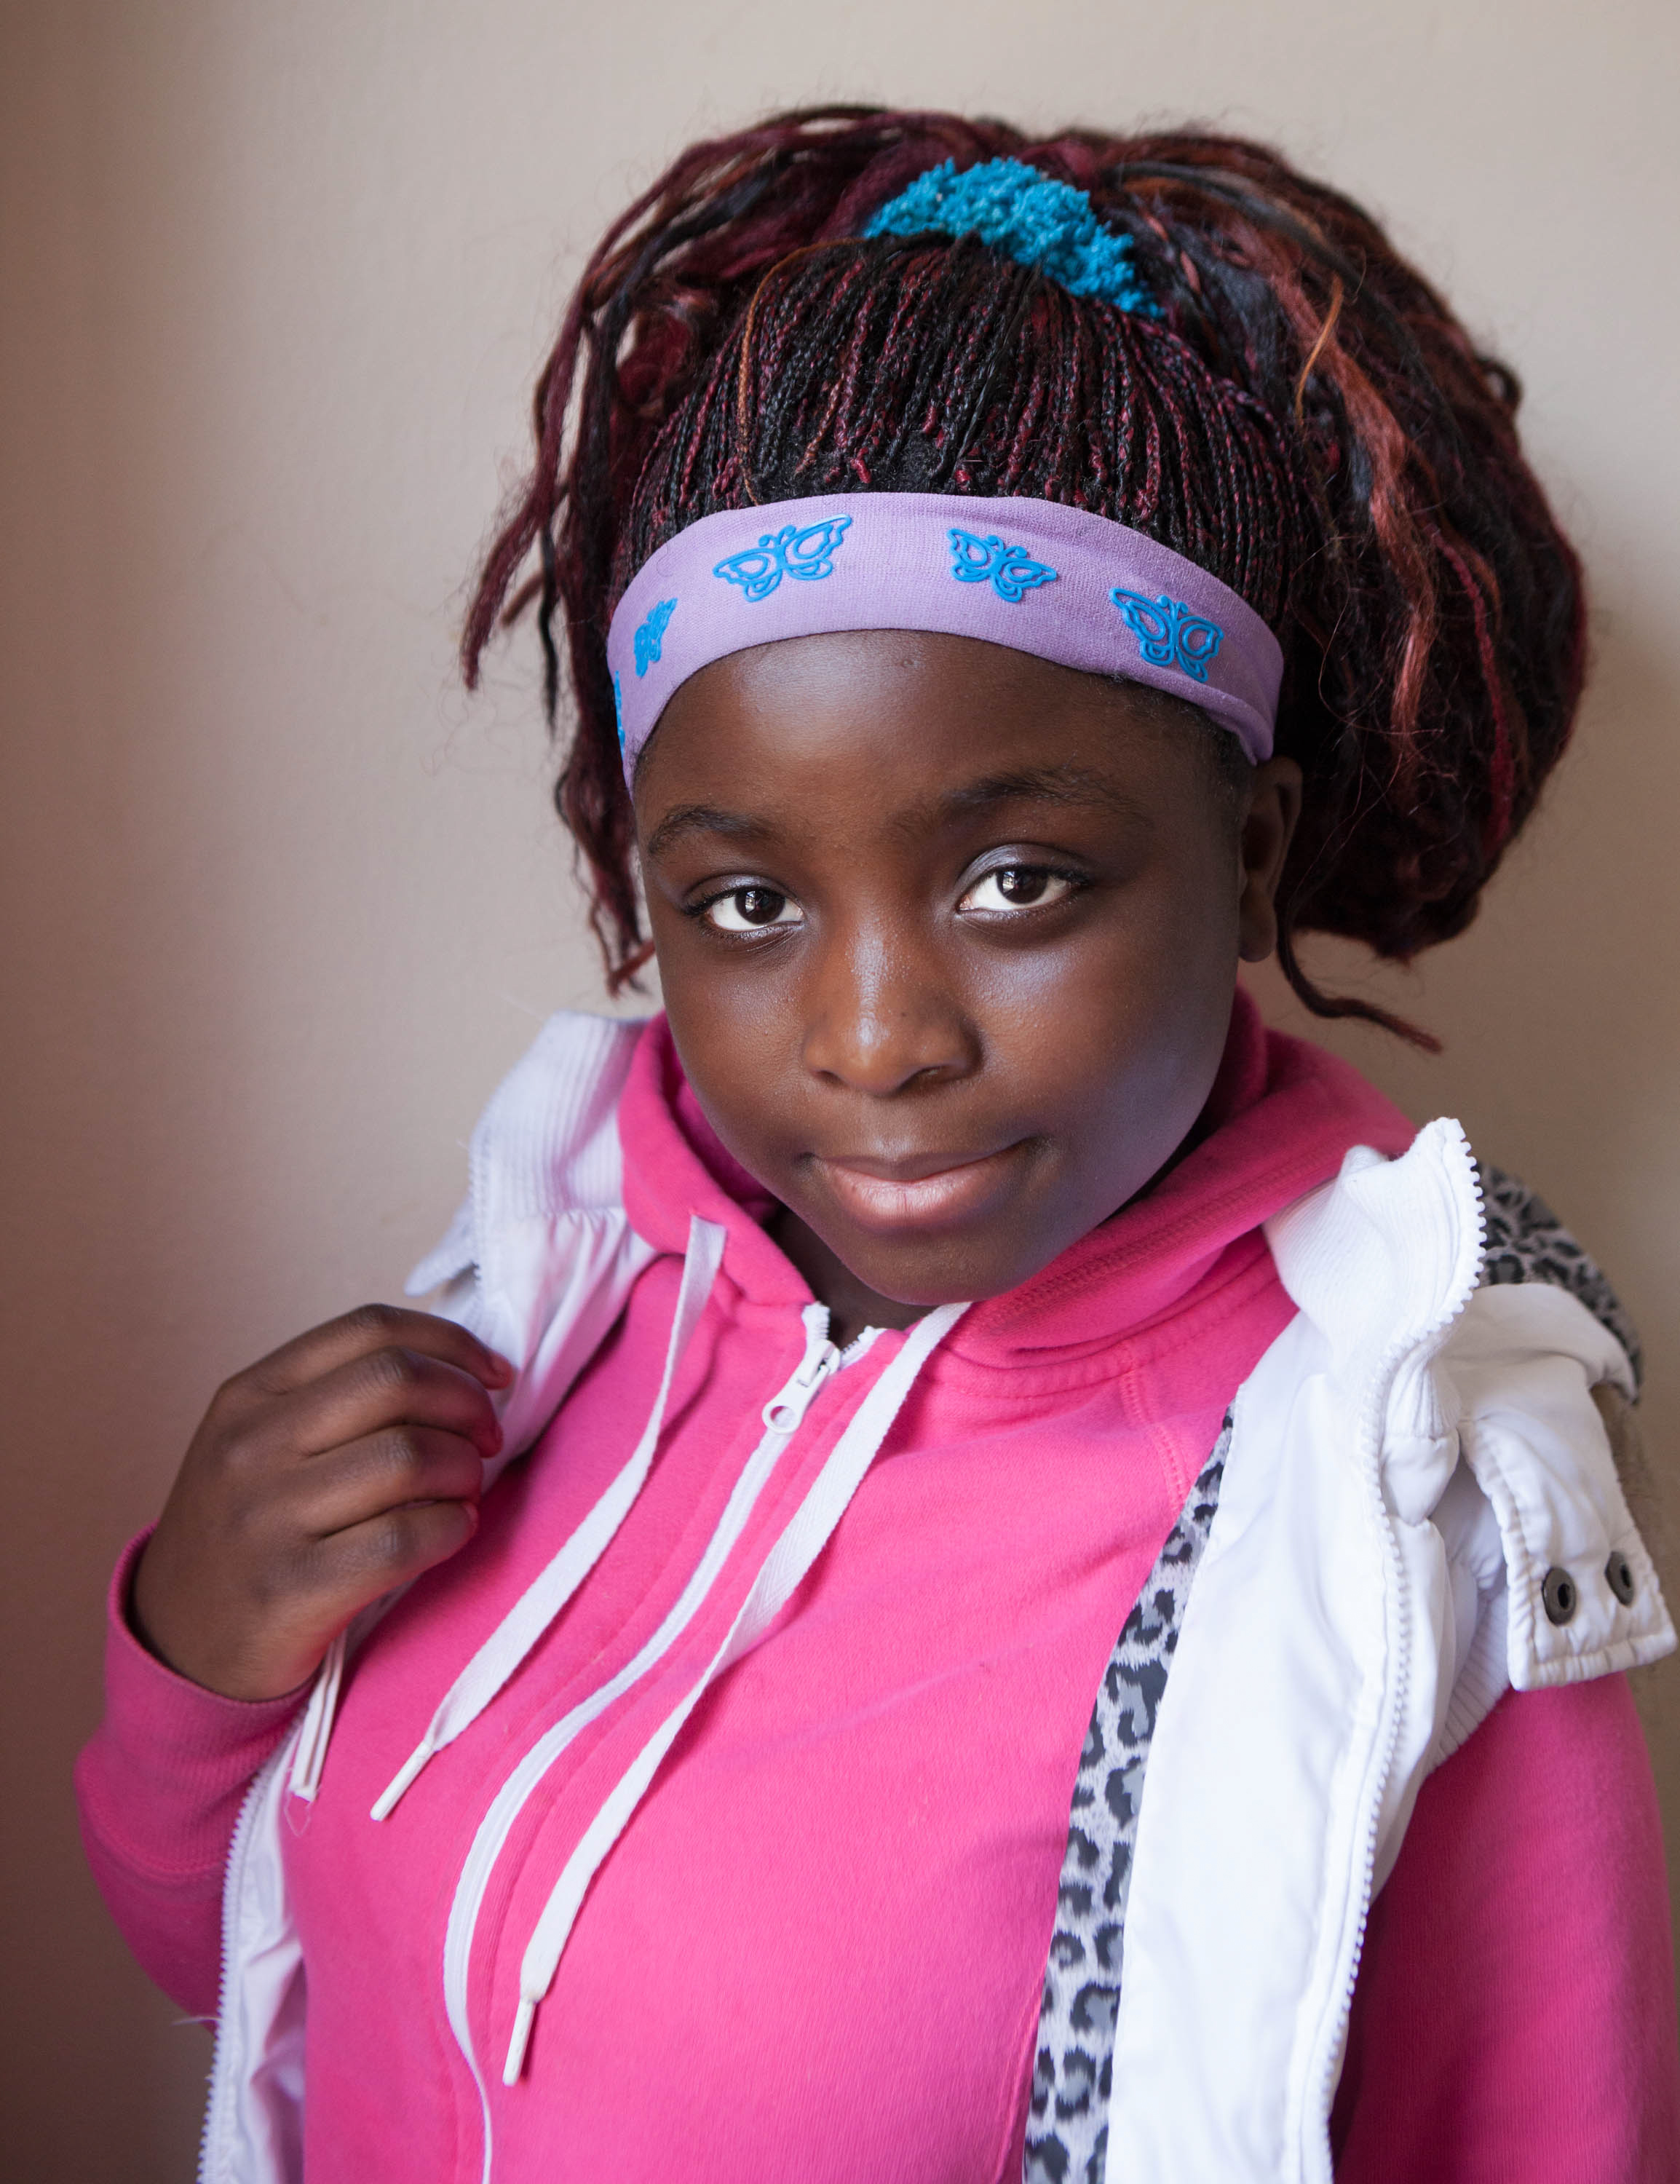 Salome Kasinge, 14, a refugee from Zambia, poses for a portrait at Mary's Place, a refugee outreach center in Rochester, NY. Salome came to the United States when she was 11 and Mary's Place helped her learn English quickly.